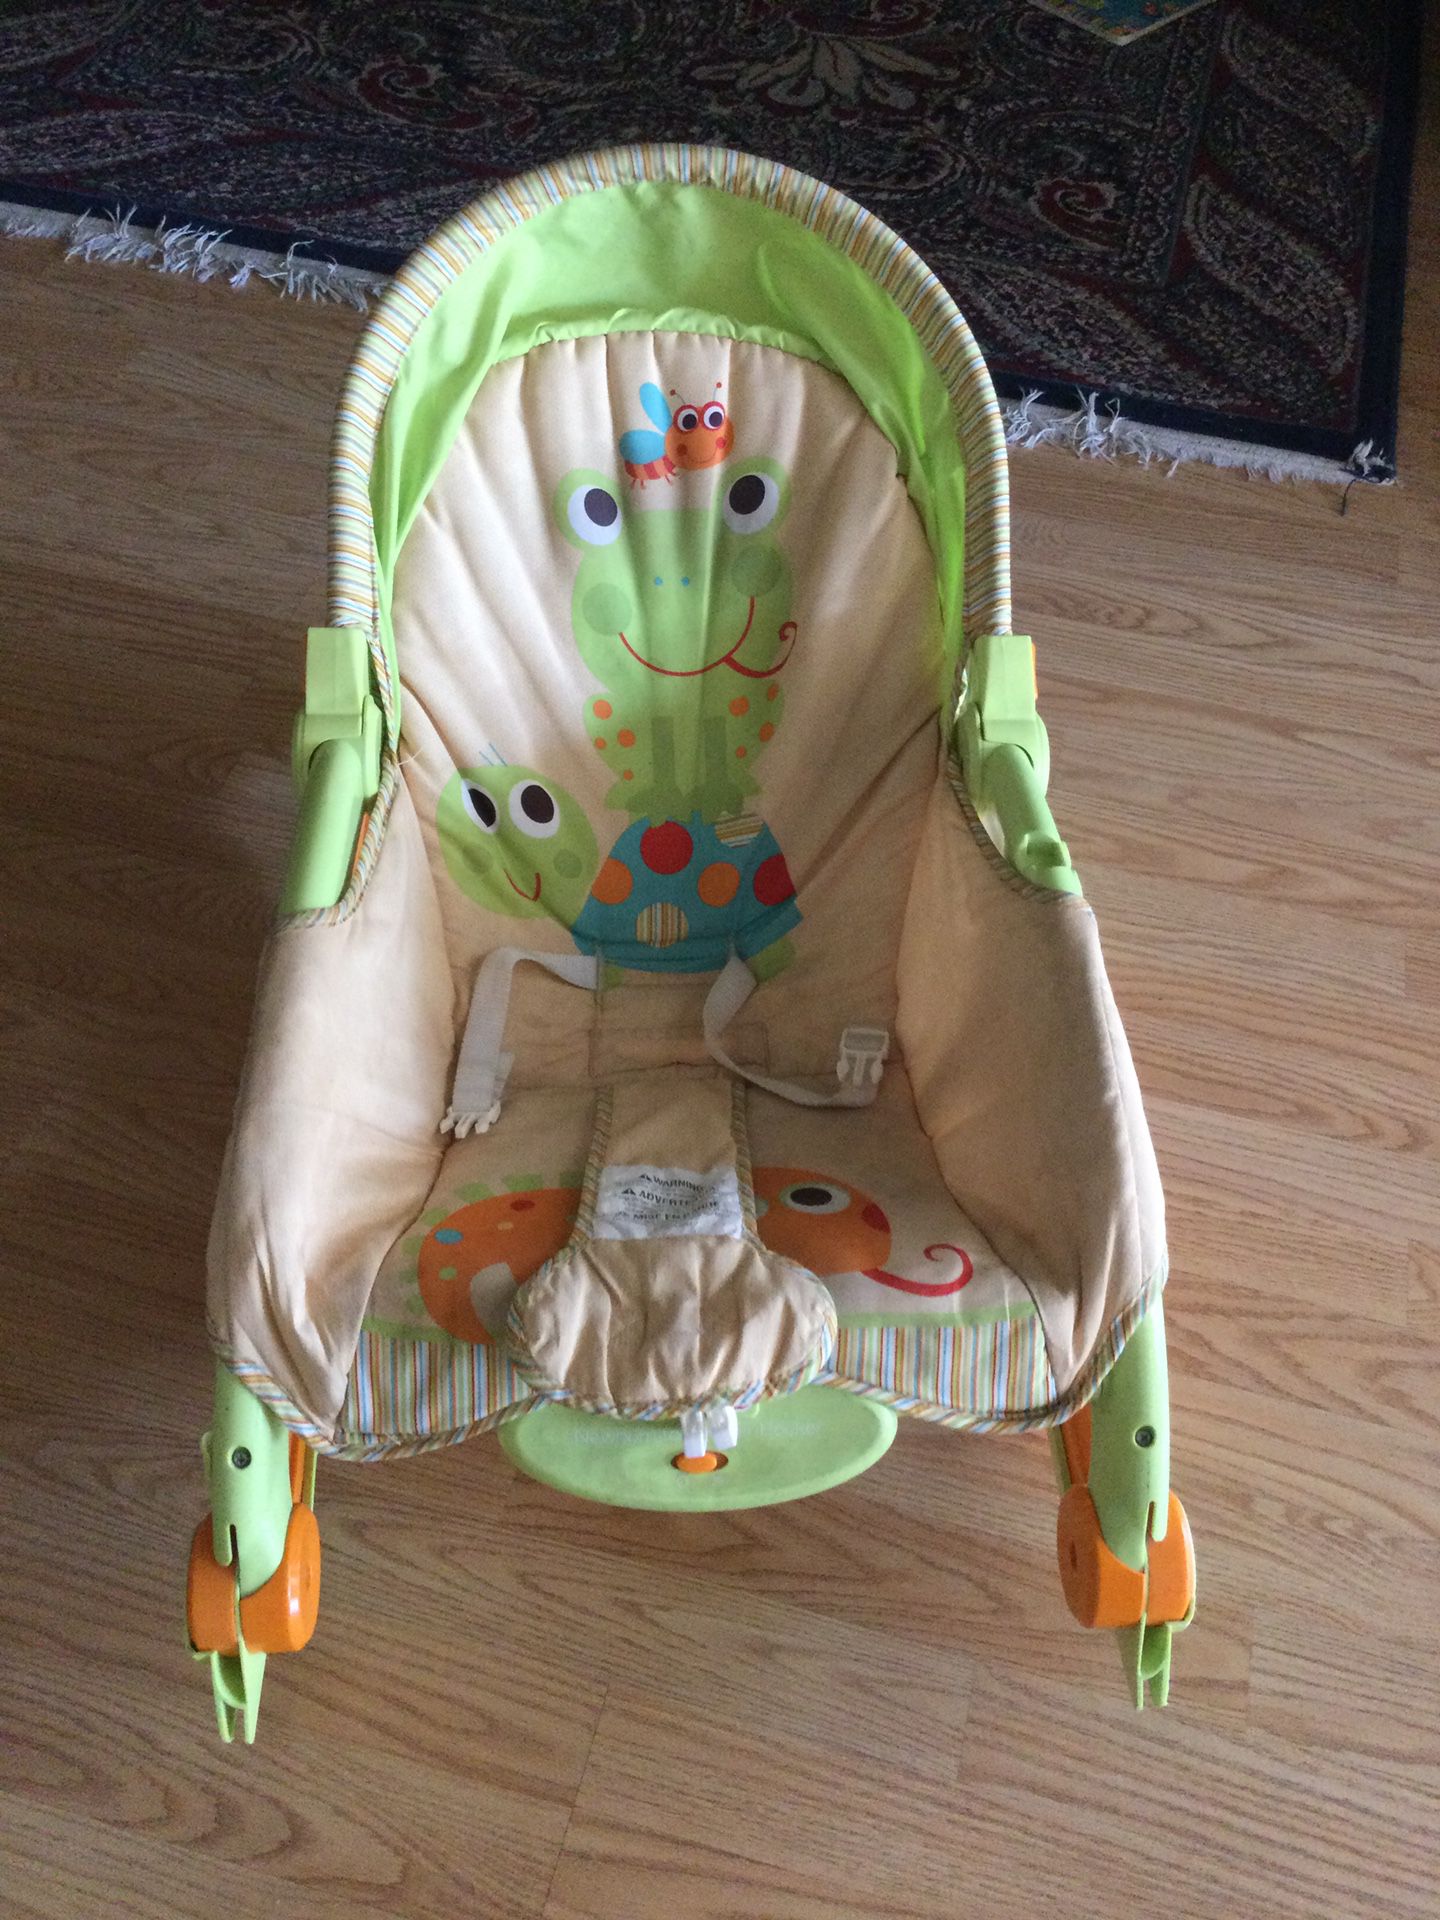 Baby Rocking Chair!! on sale for $9